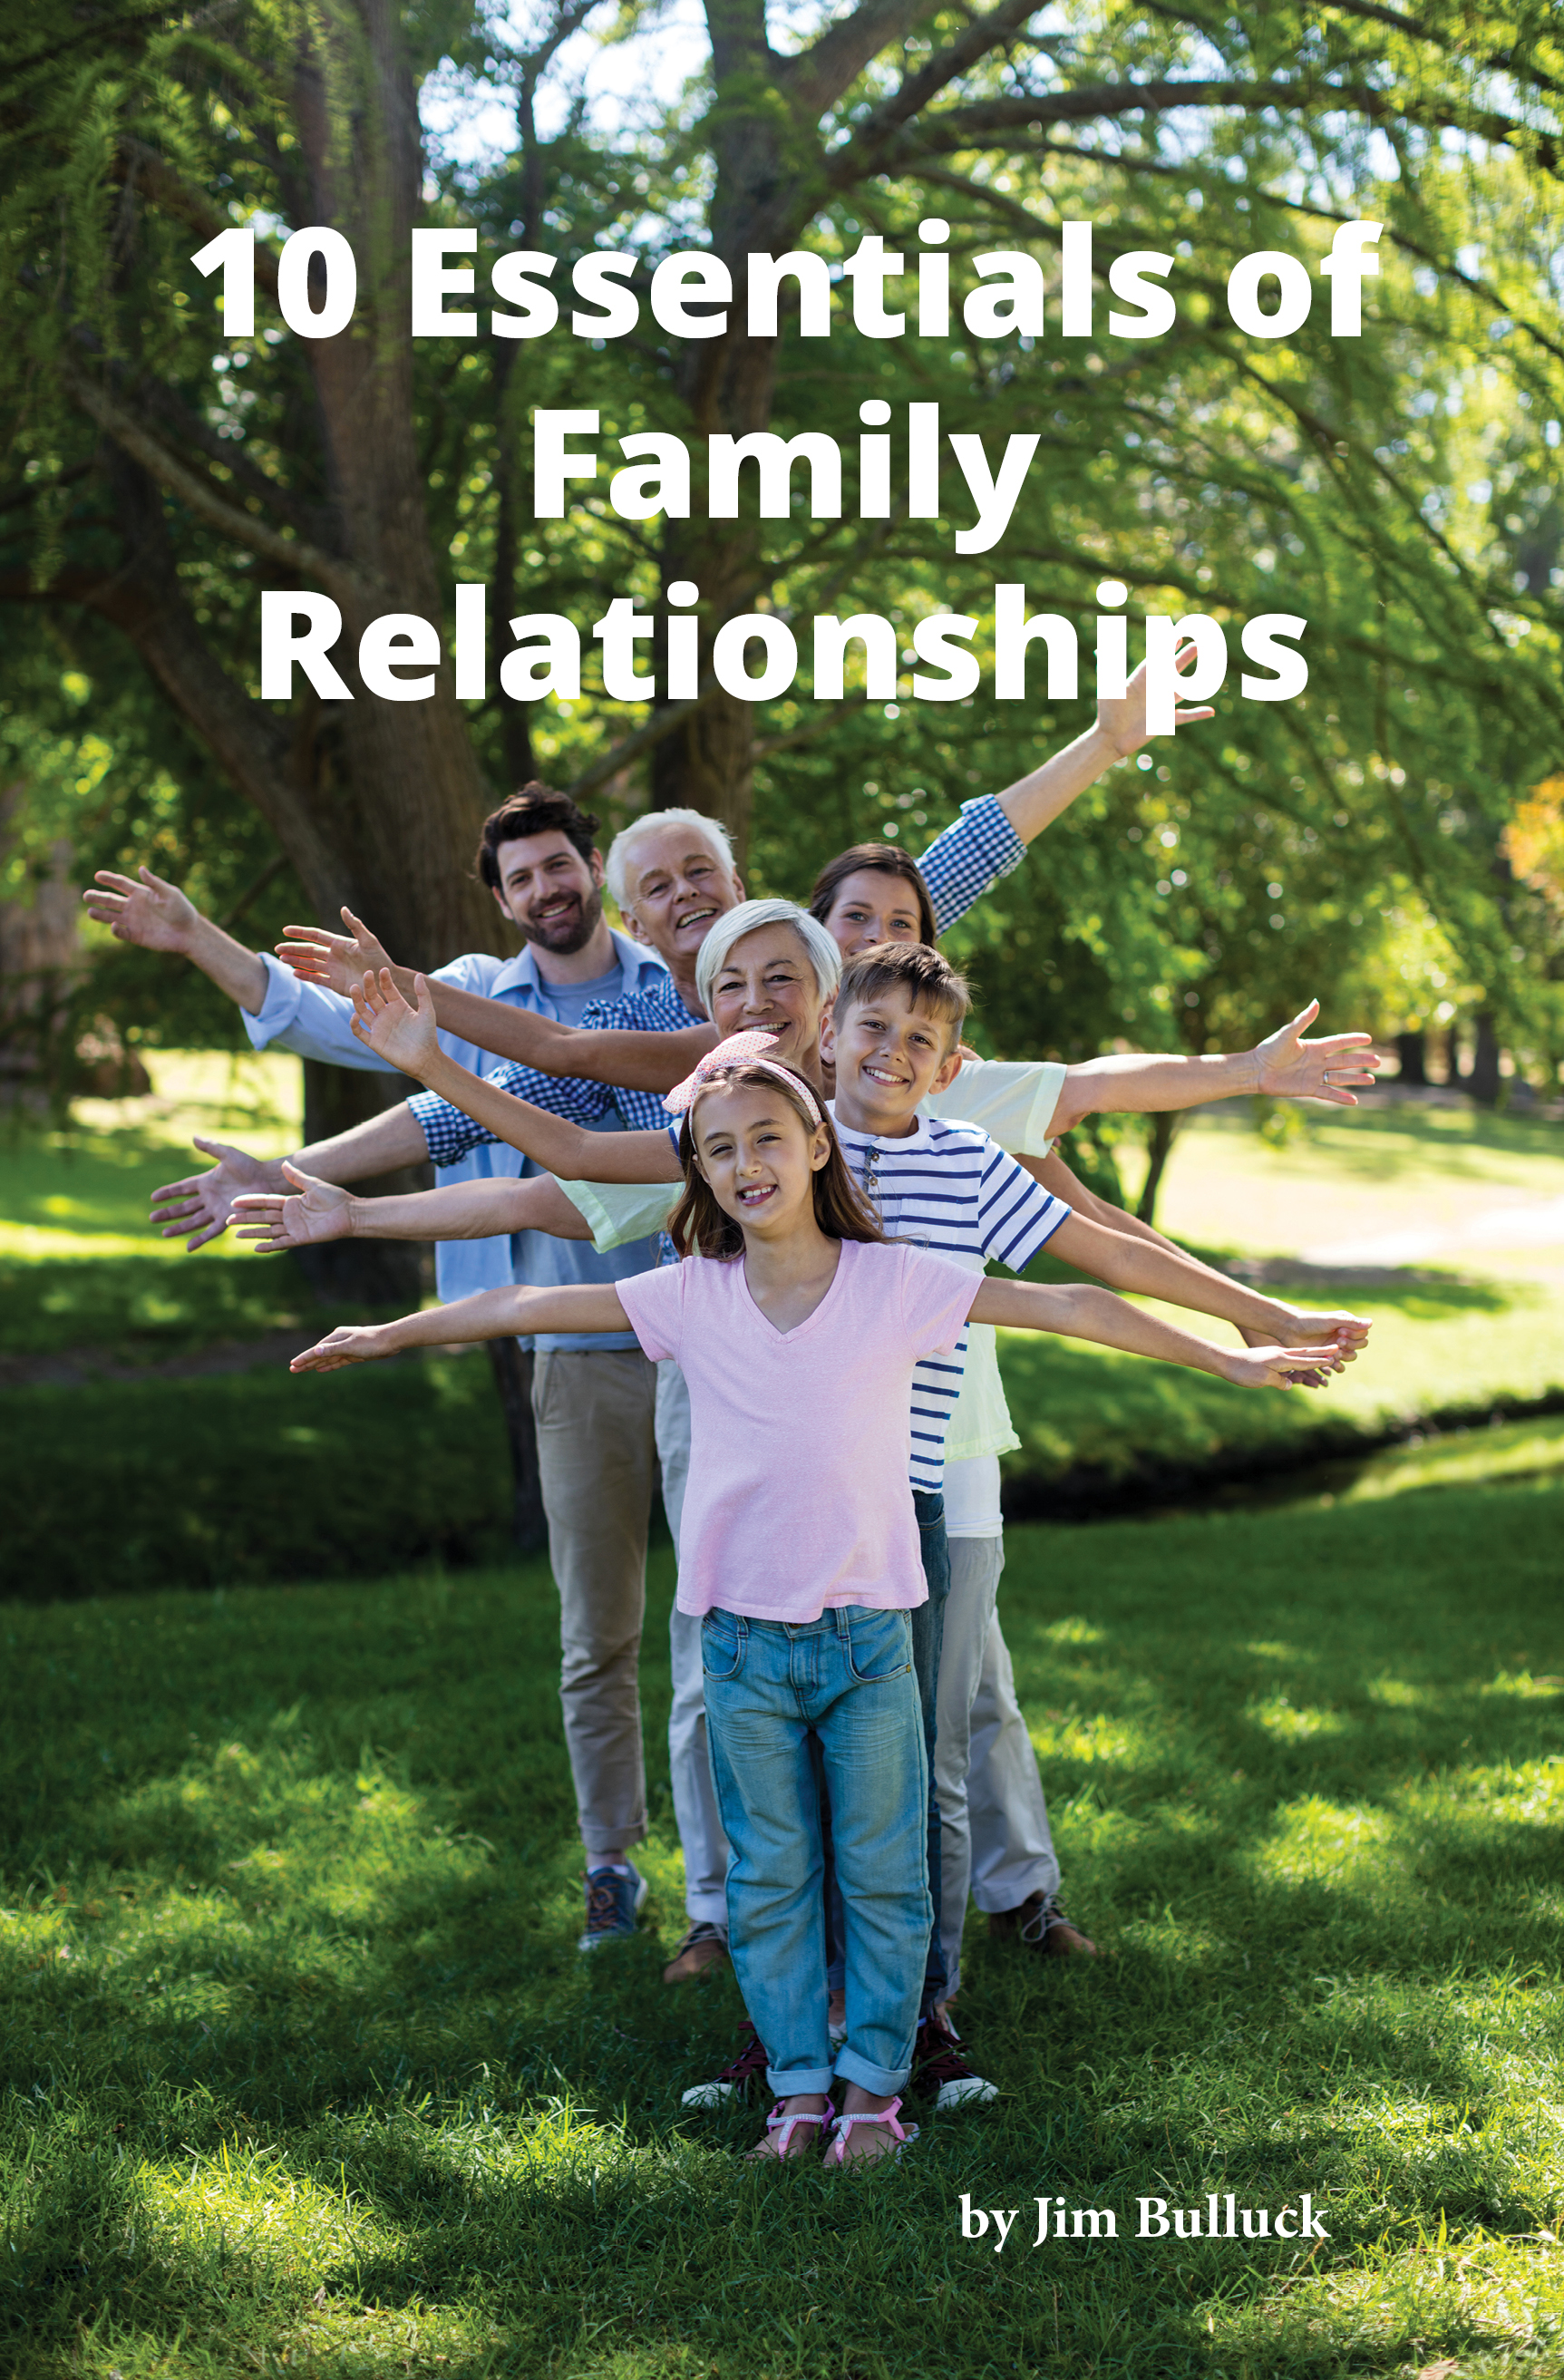 The-10-Essentials-of-Family-Relationships